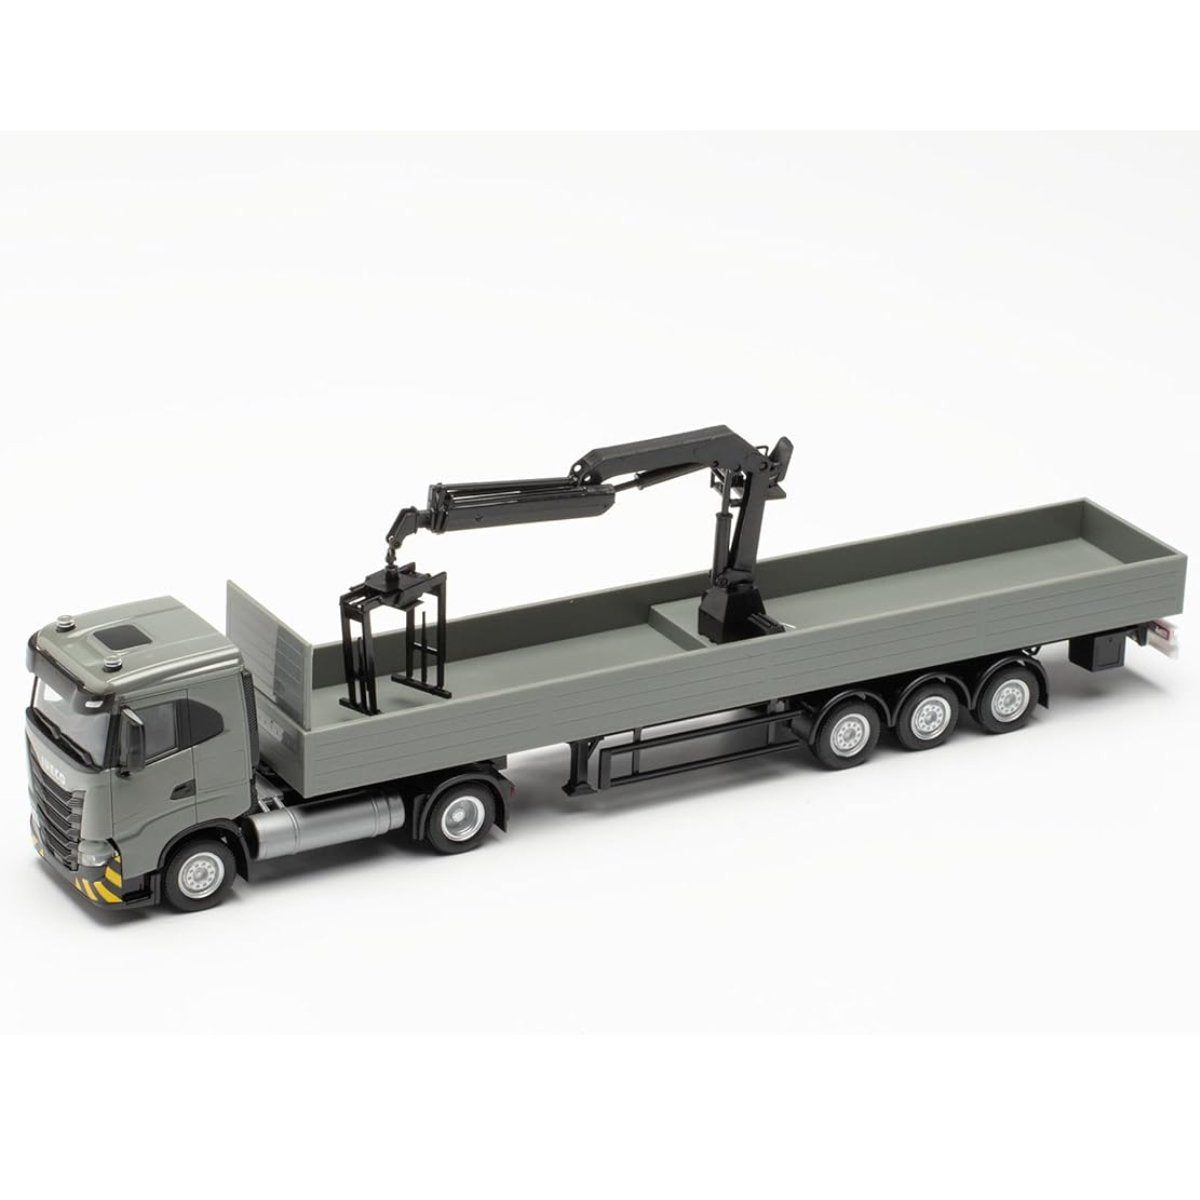 Herpa Iveco S - Way ND Flatbed Truck With Loading Crane - 1:87 Scale - Phillips Hobbies